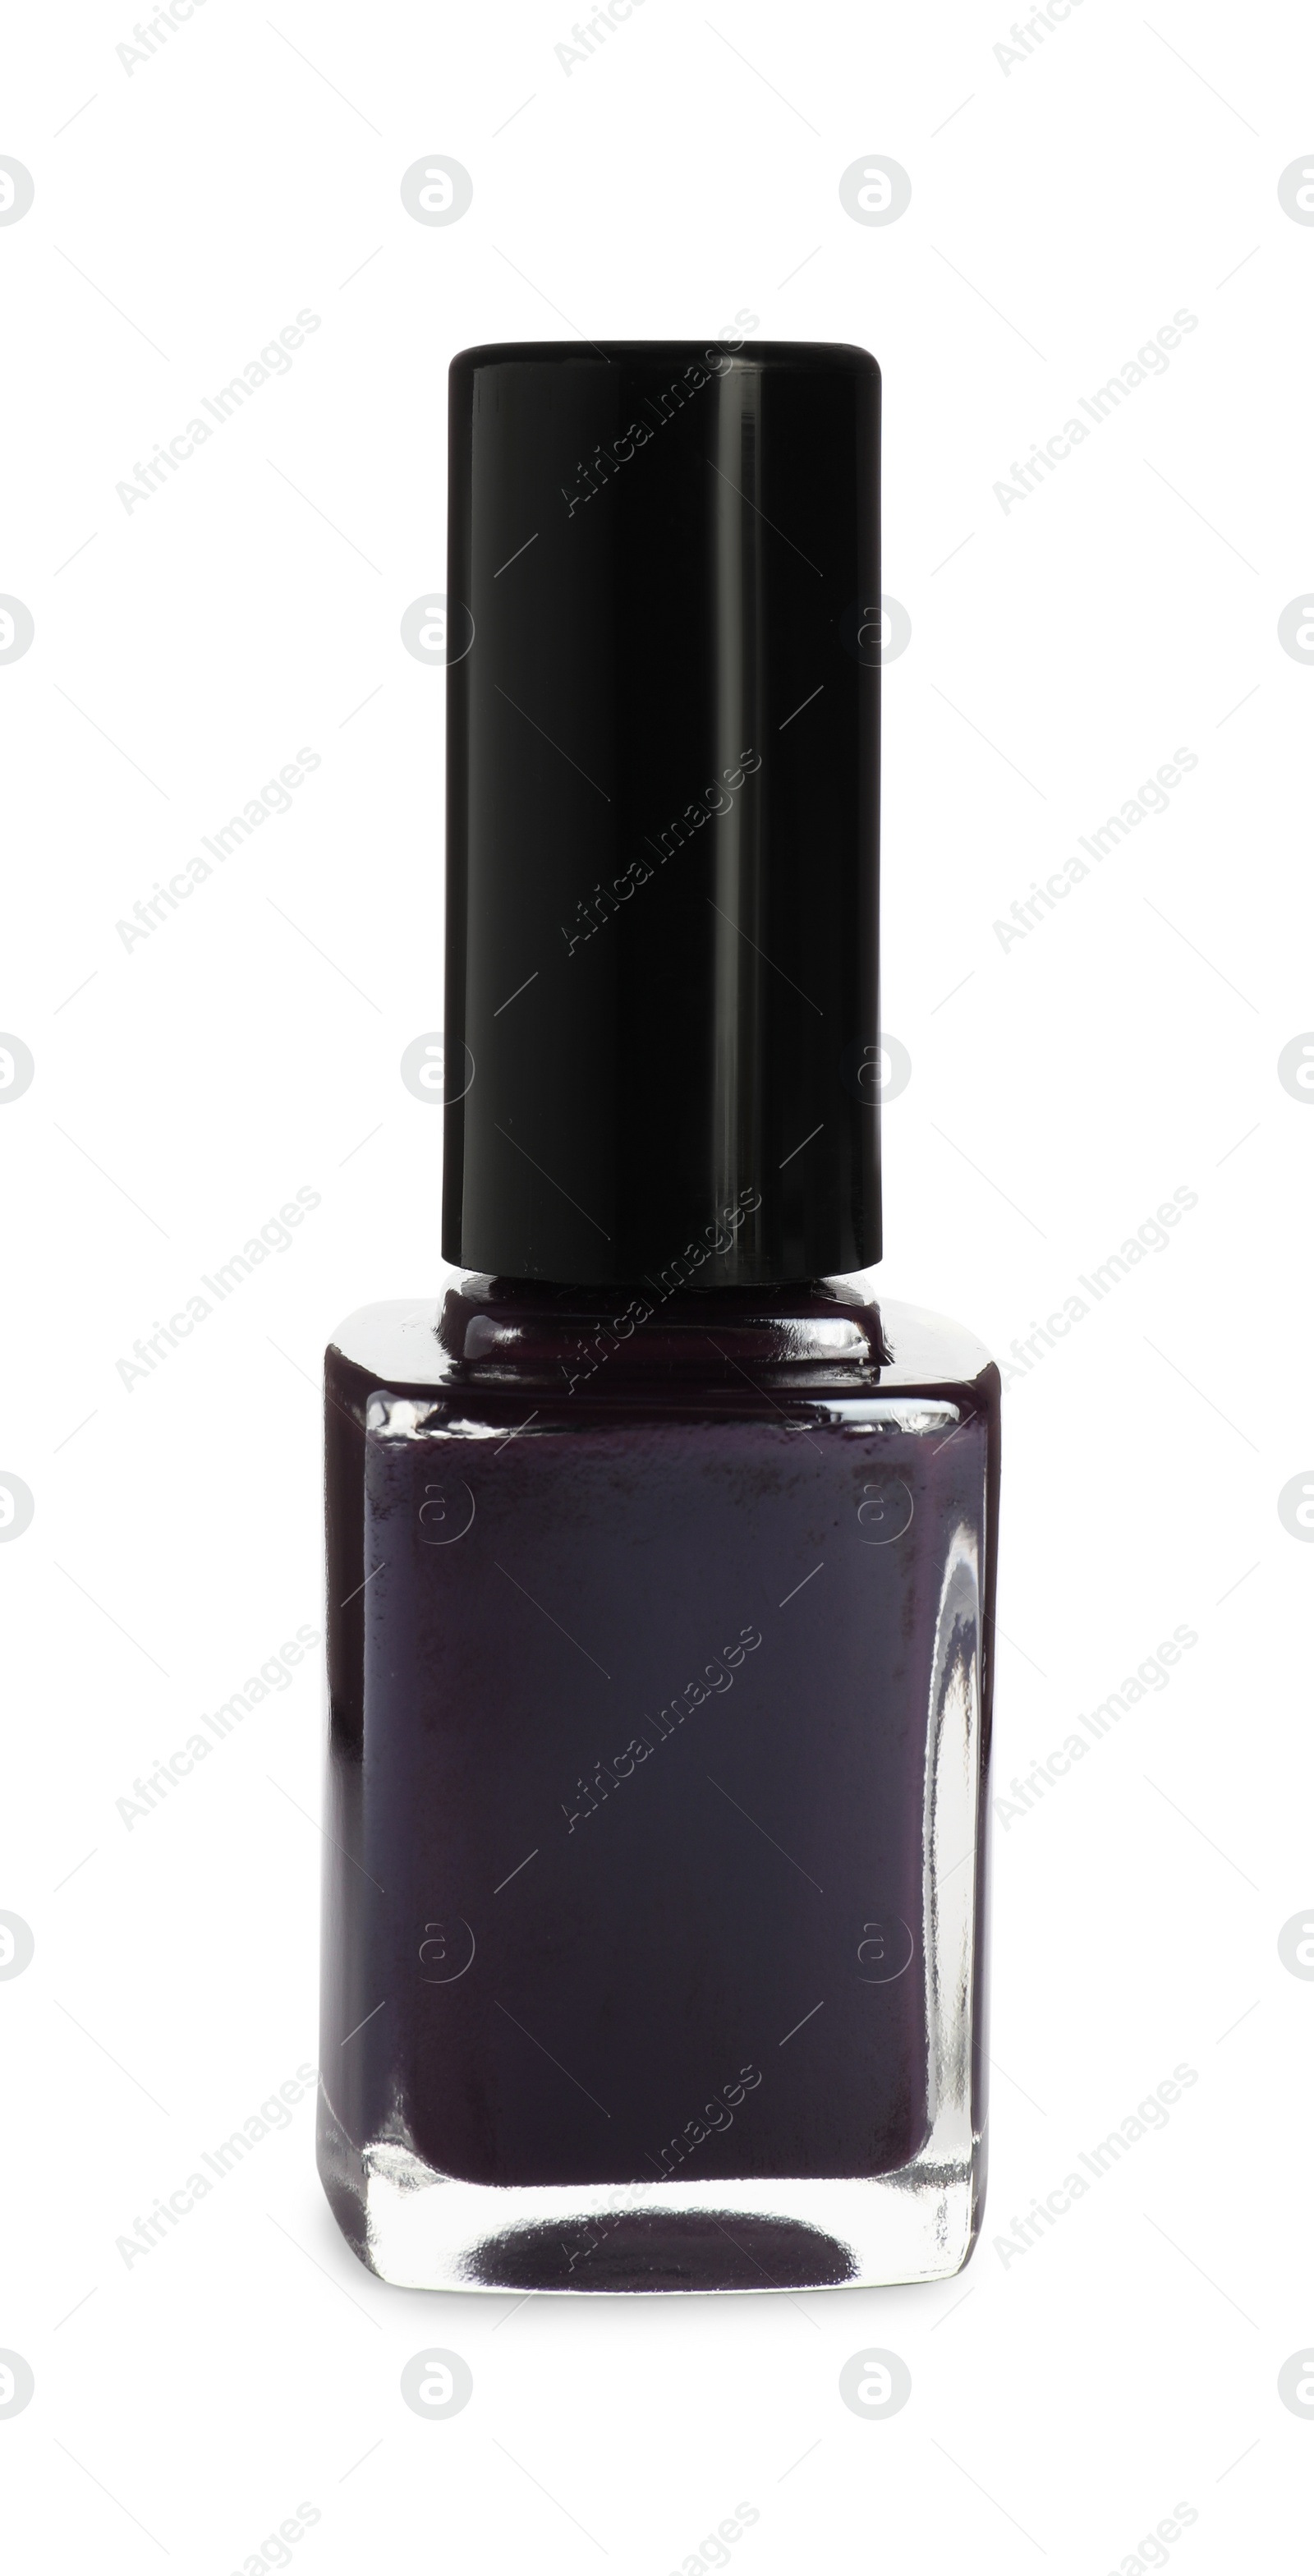 Photo of Purple nail polish in bottle isolated on white